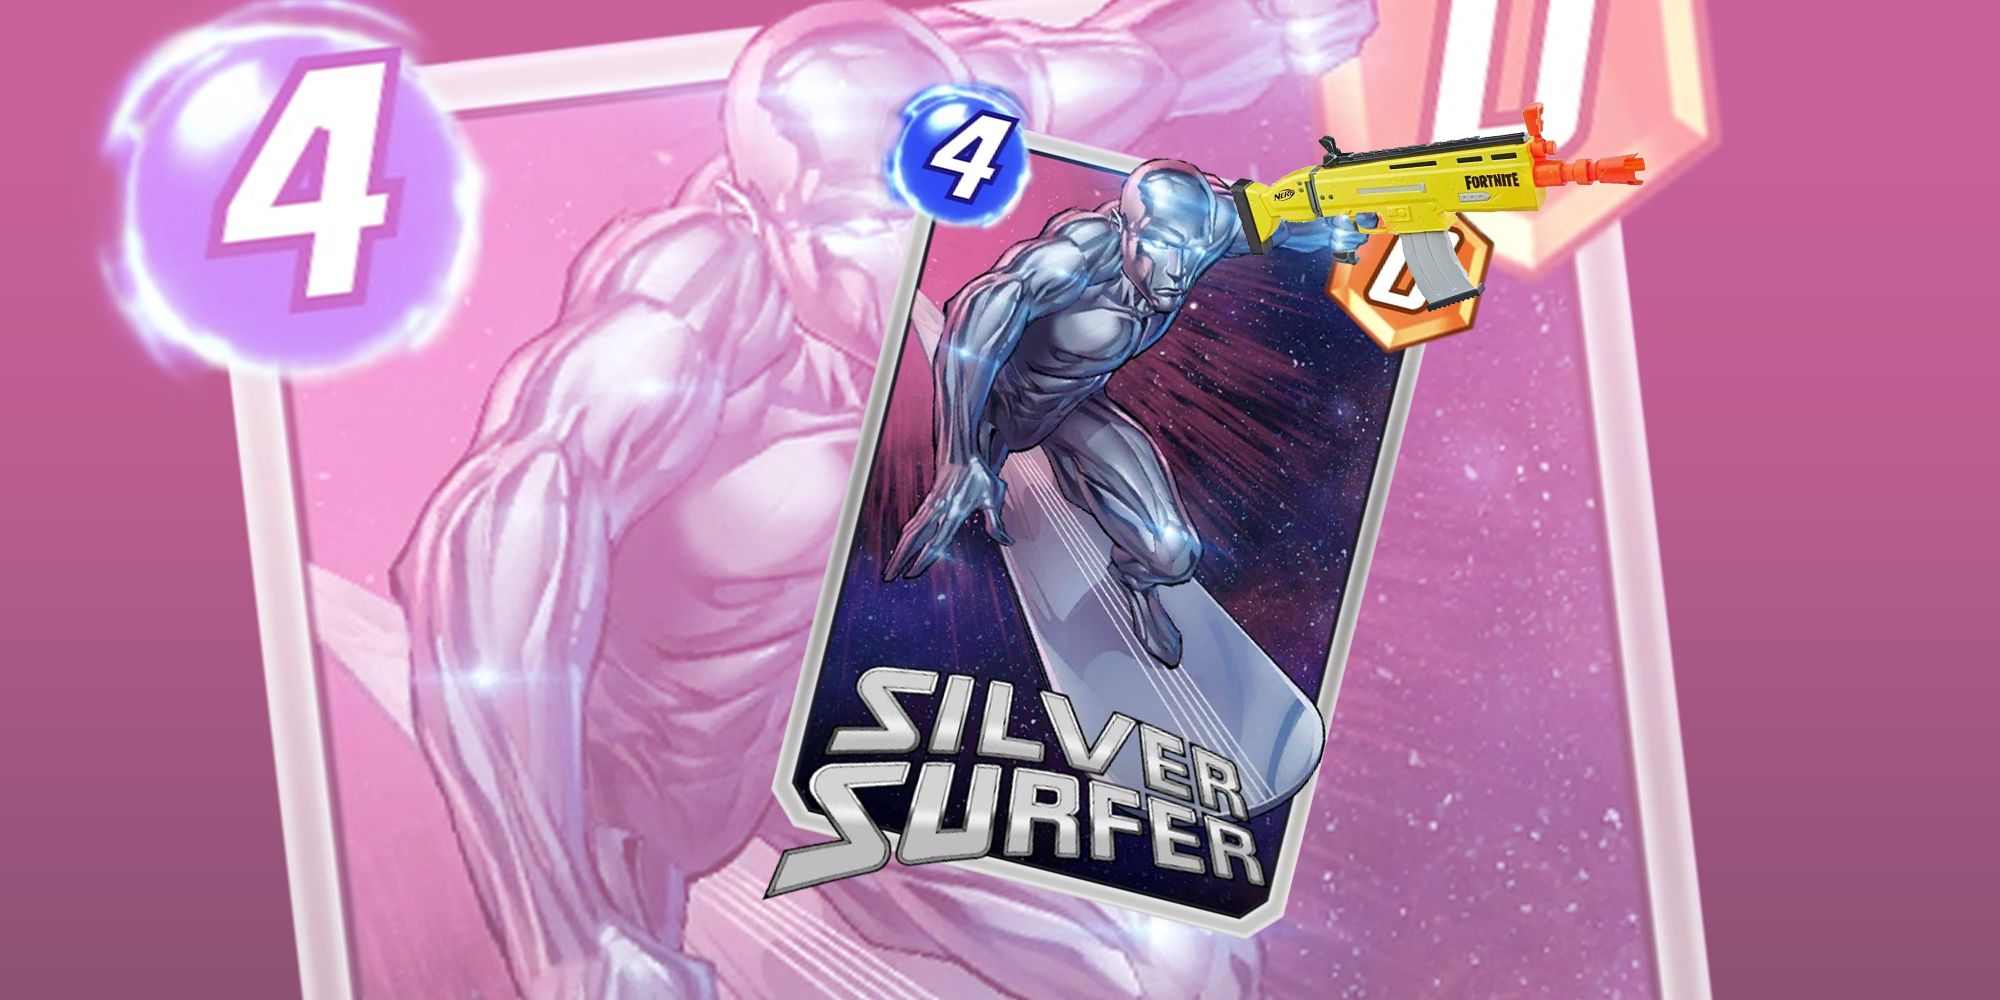 Silver Surfer with a Nerf gun